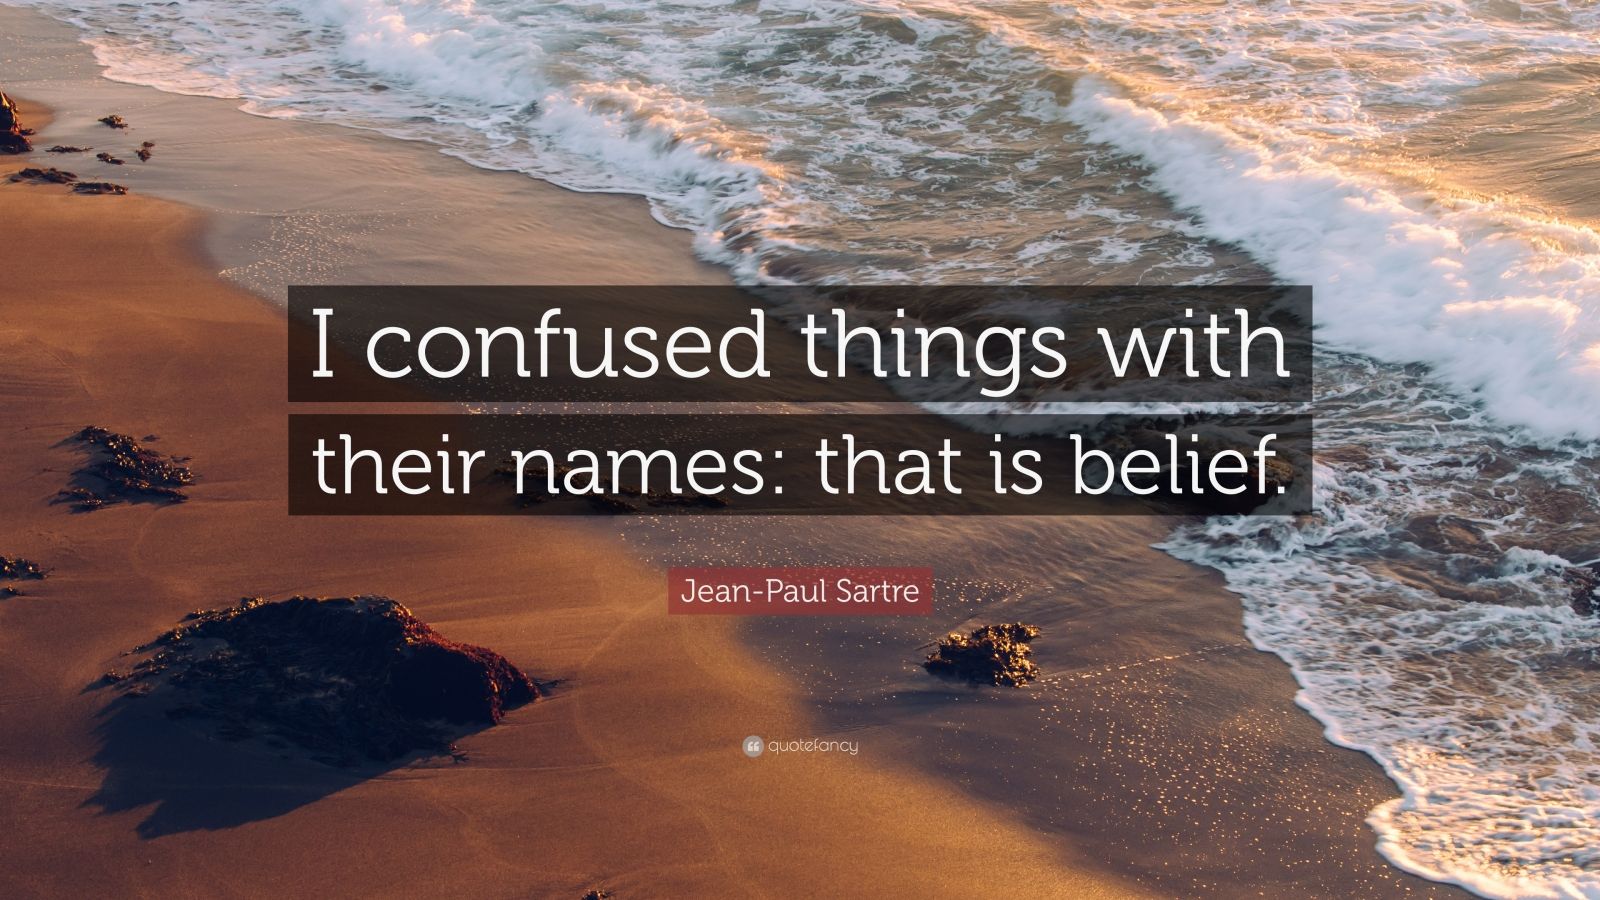 Jean-Paul Sartre Quote: "I confused things with their ...